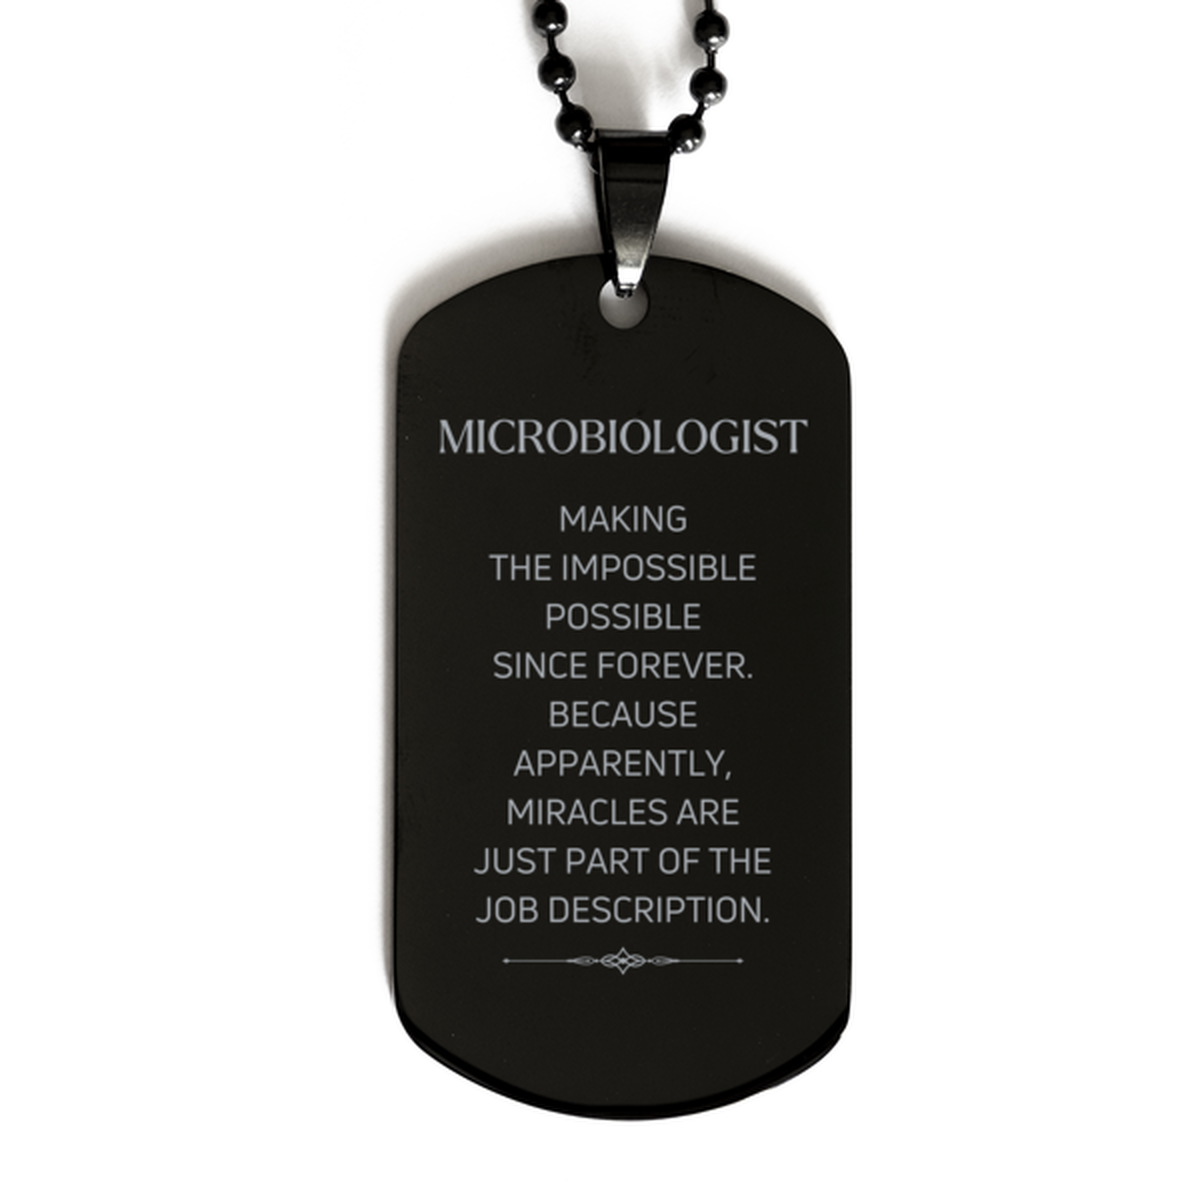 Funny Microbiologist Gifts, Miracles are just part of the job description, Inspirational Birthday Black Dog Tag For Microbiologist, Men, Women, Coworkers, Friends, Boss